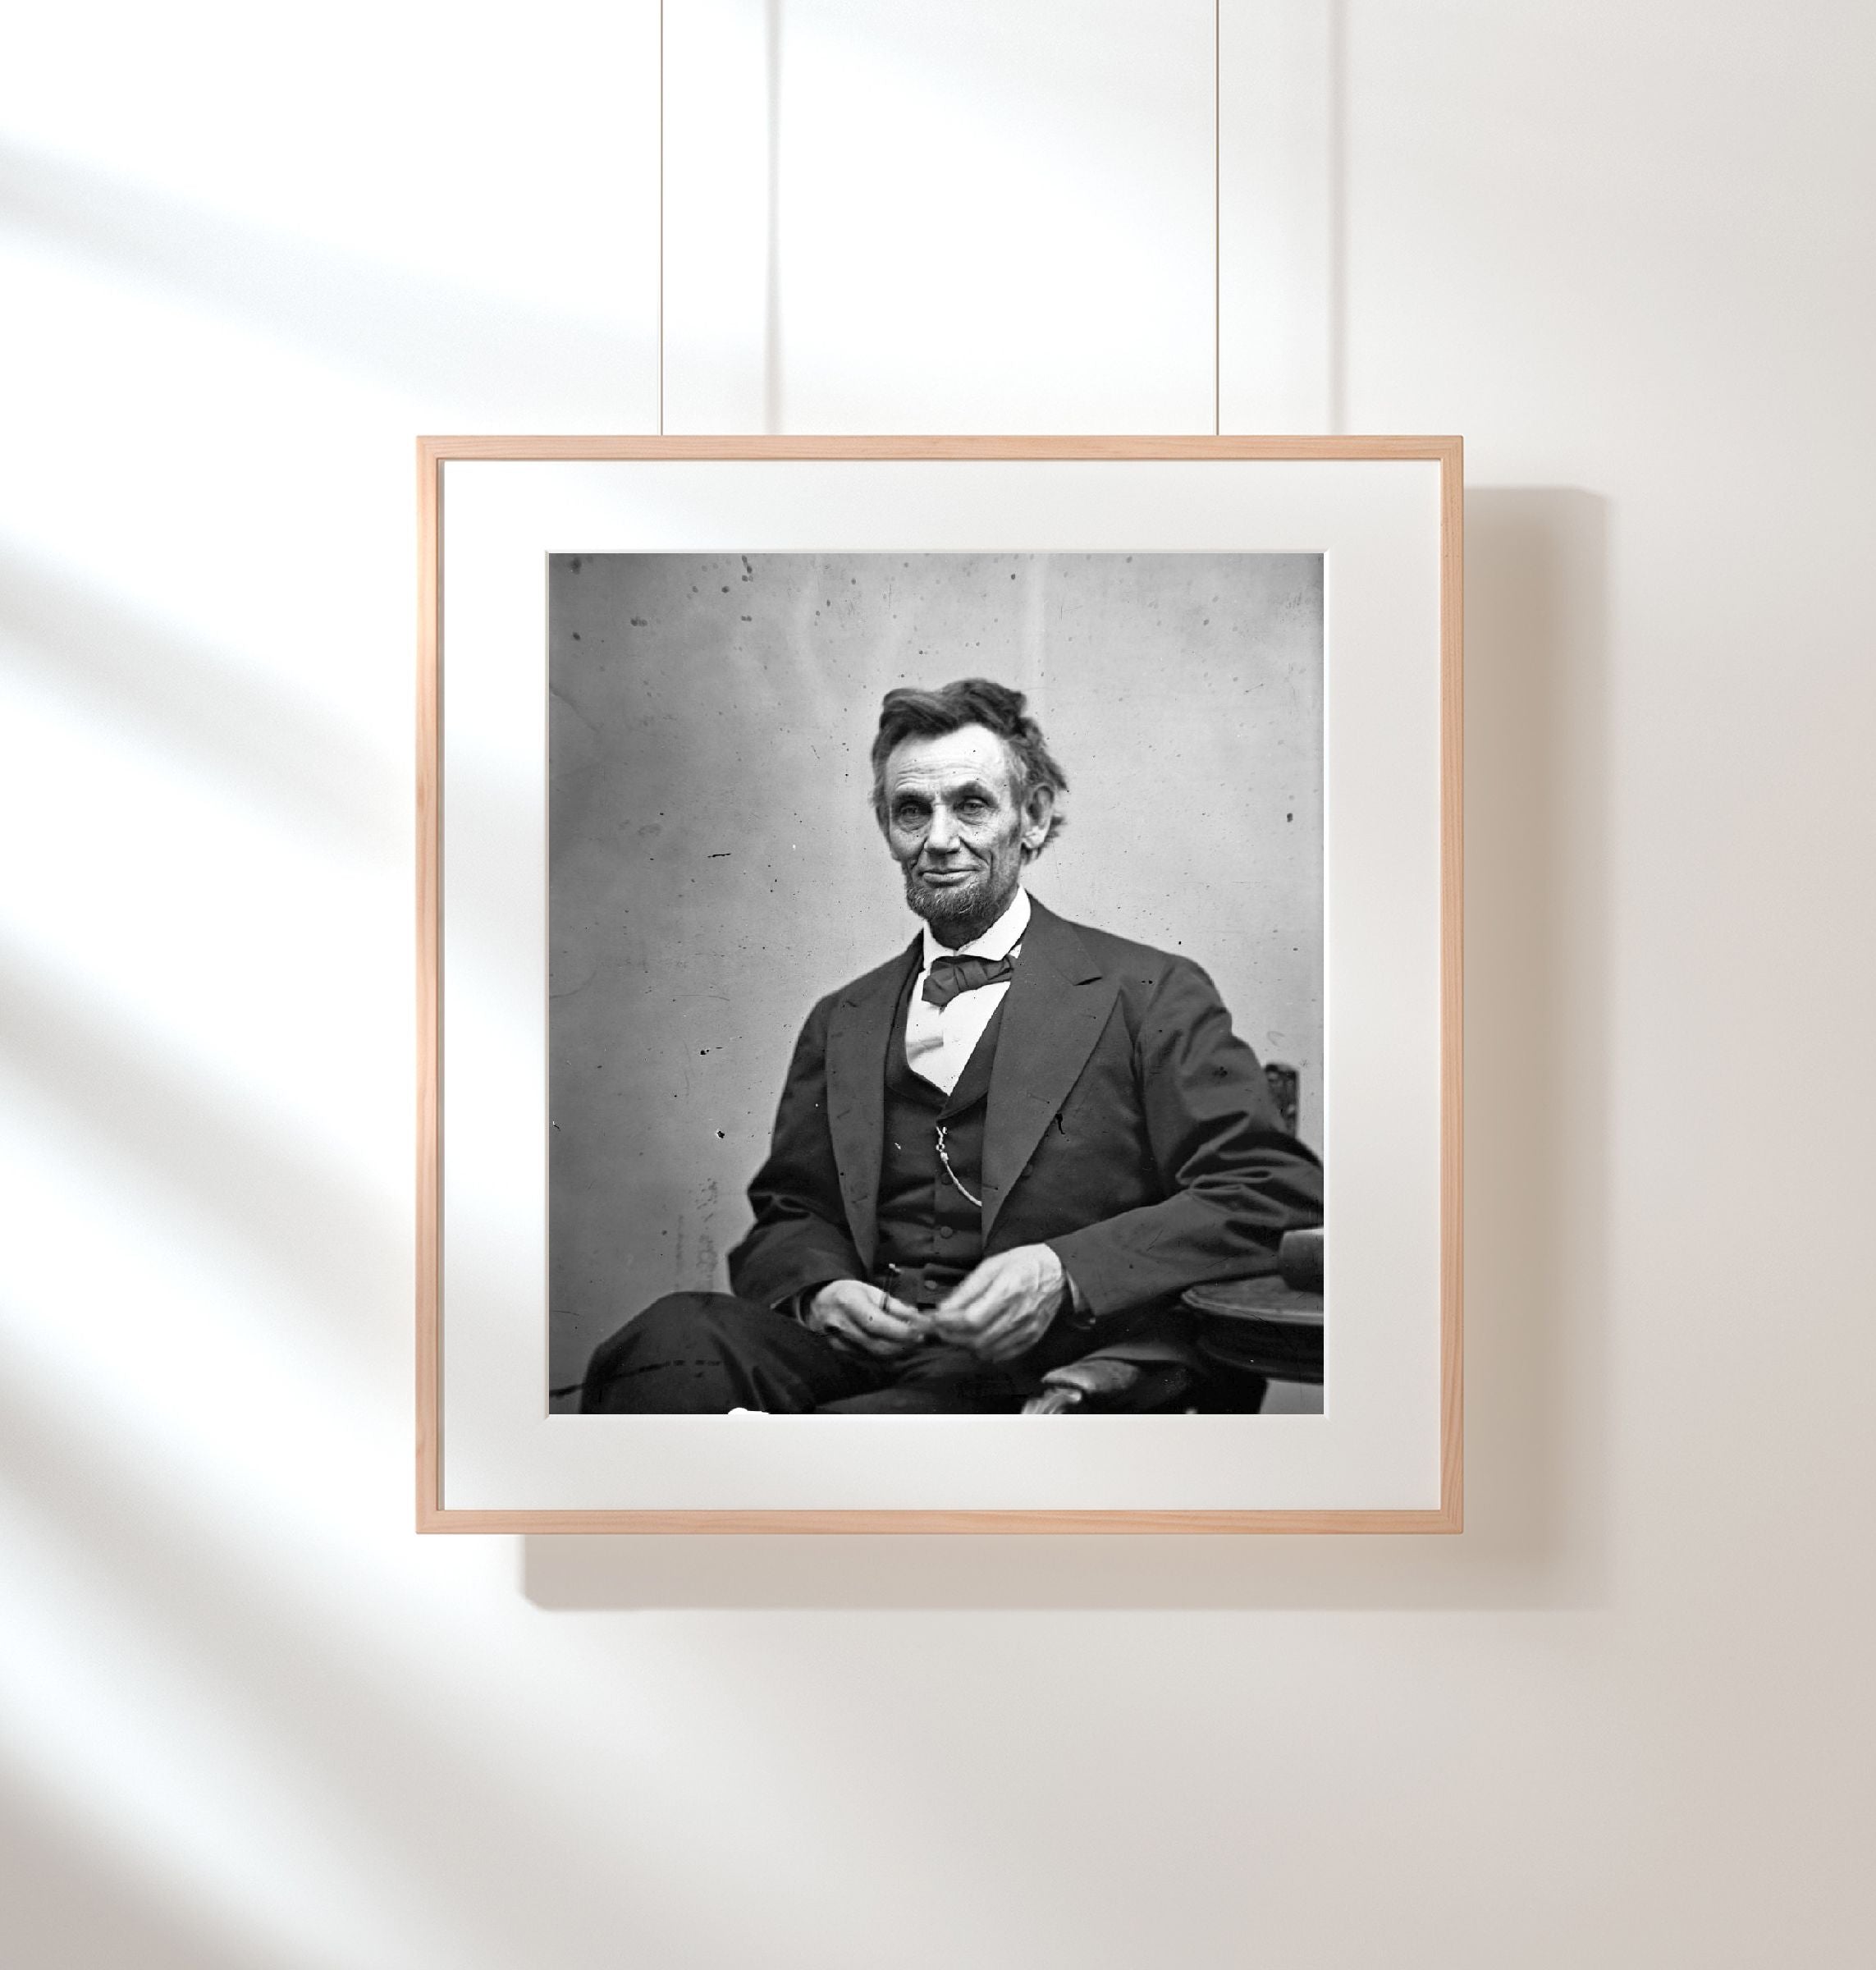 1865 Photo Abraham Lincoln, three-quarter length portrait, seated and holding hi